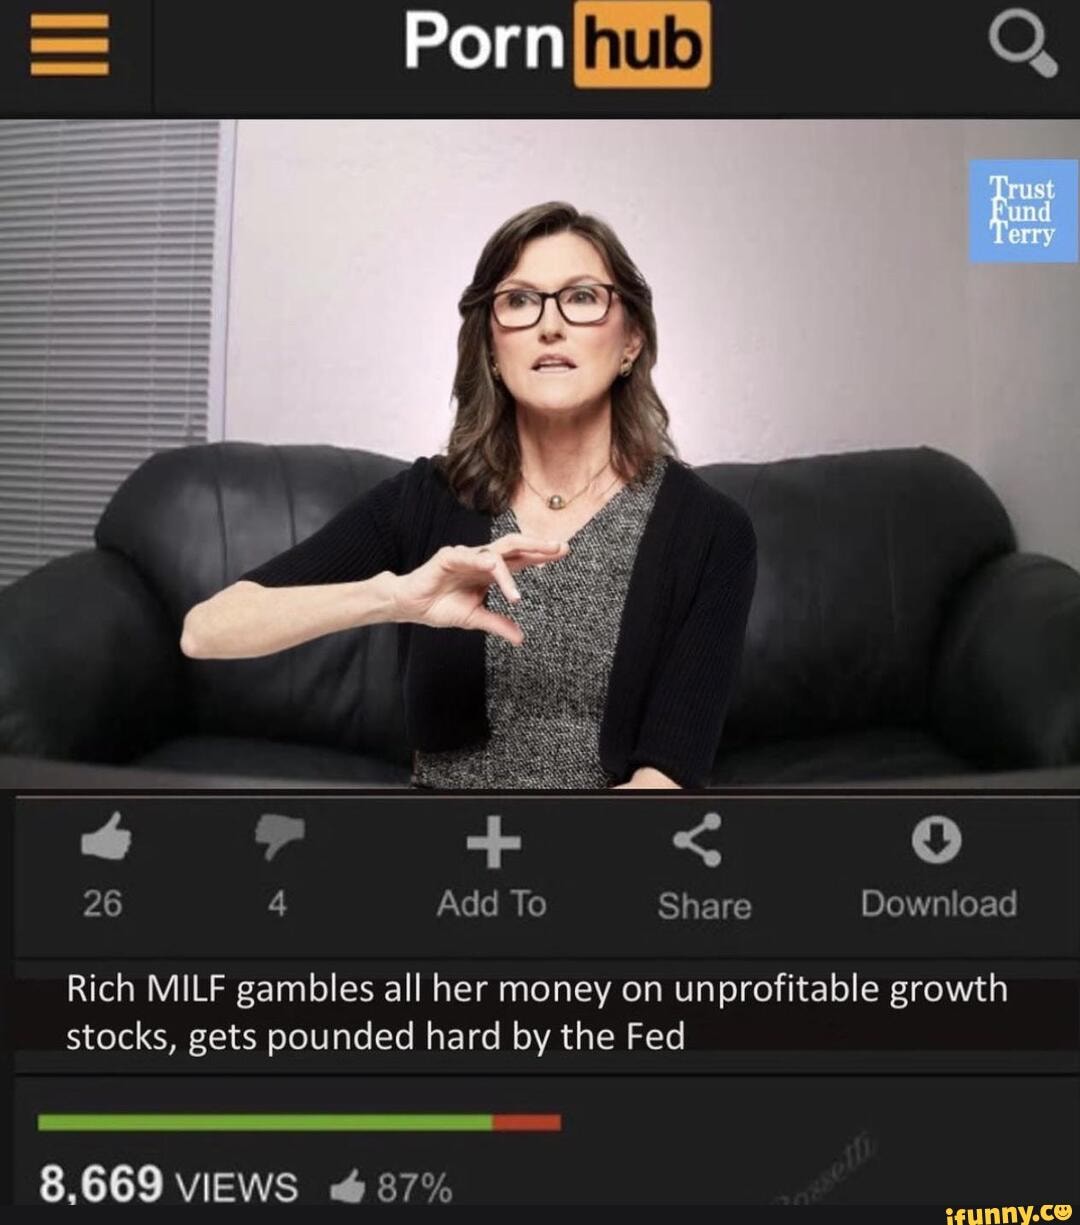 Rich Money Porn - Porn hub Q, Terry 26 Add To Share Download Rich MILF gambles all her money  on unprofitable growth stocks, gets pounded hard by the Fed 8.669 VIEWS @  87% - iFunny Brazil